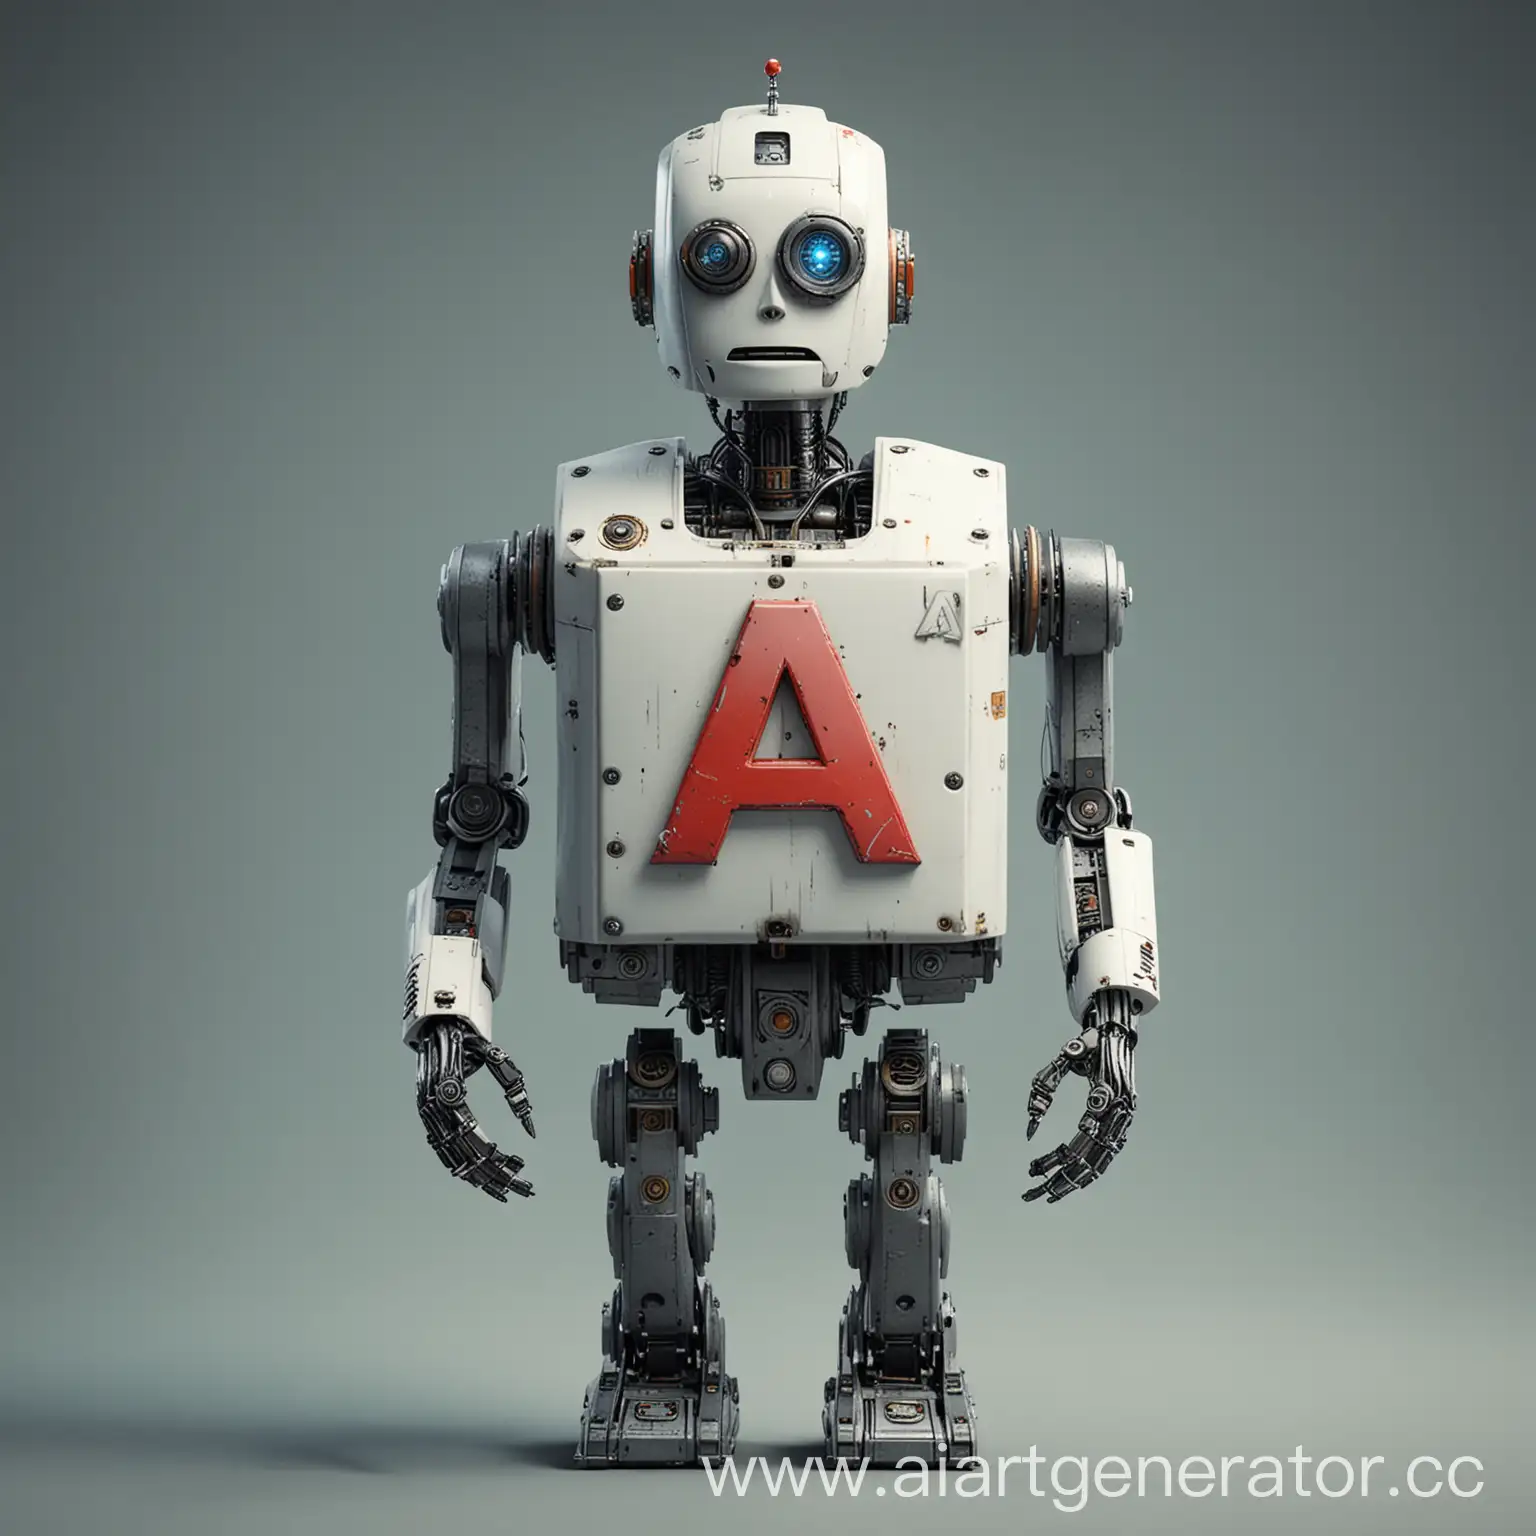 Robot-with-Letter-A-Emblem-Standing-Tall